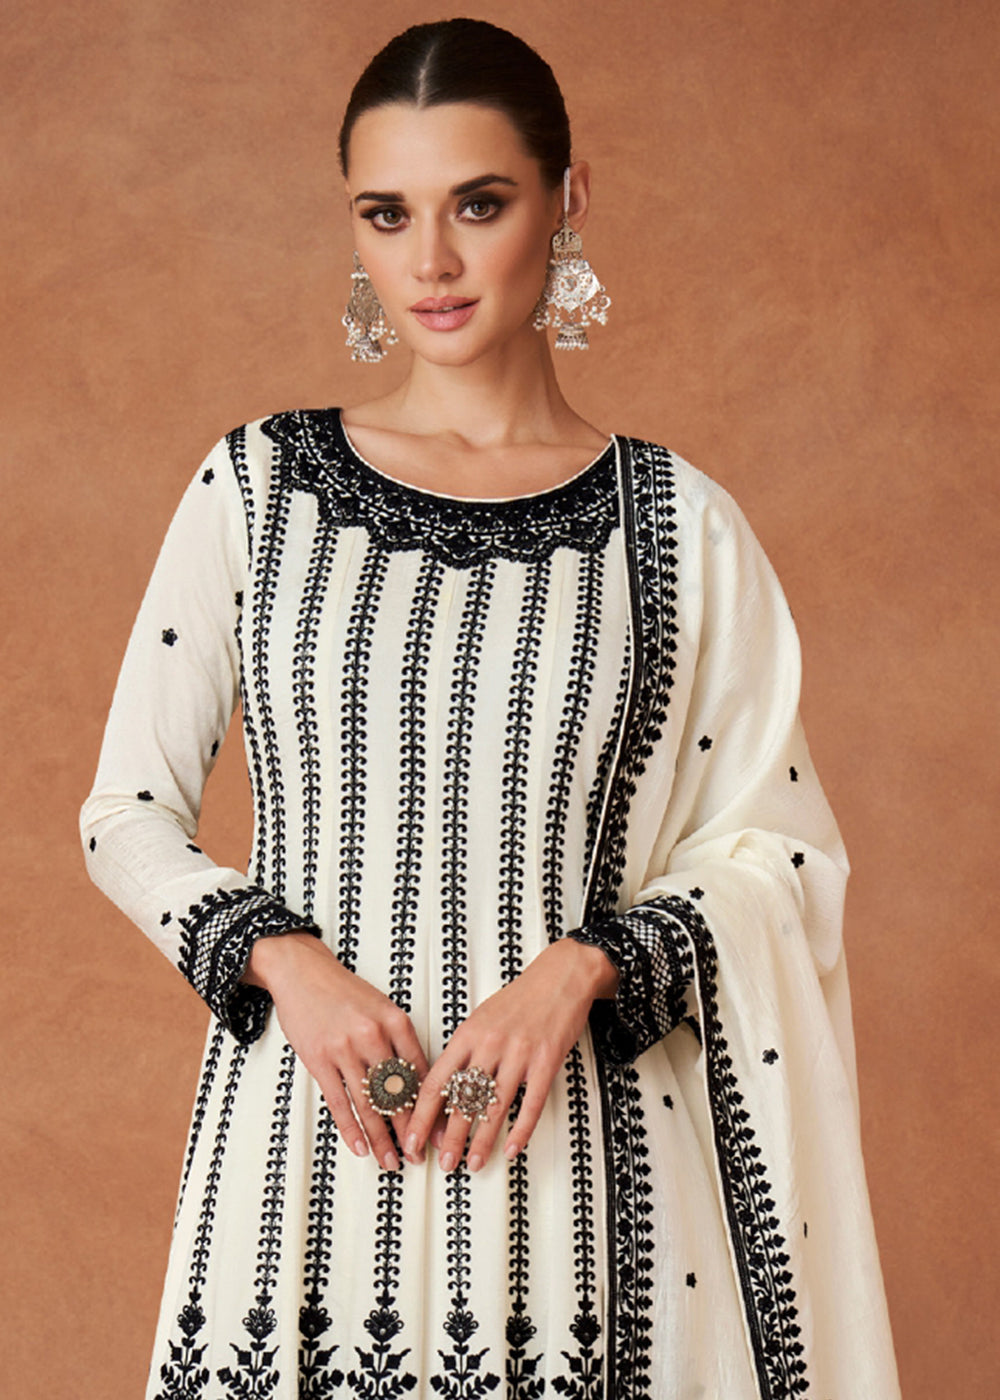 Shop Now Premium Silk Embroidered Off White Festive Sharara Suit Online at Empress Clothing in USA, UK, Canada, Italy & Worldwide. 